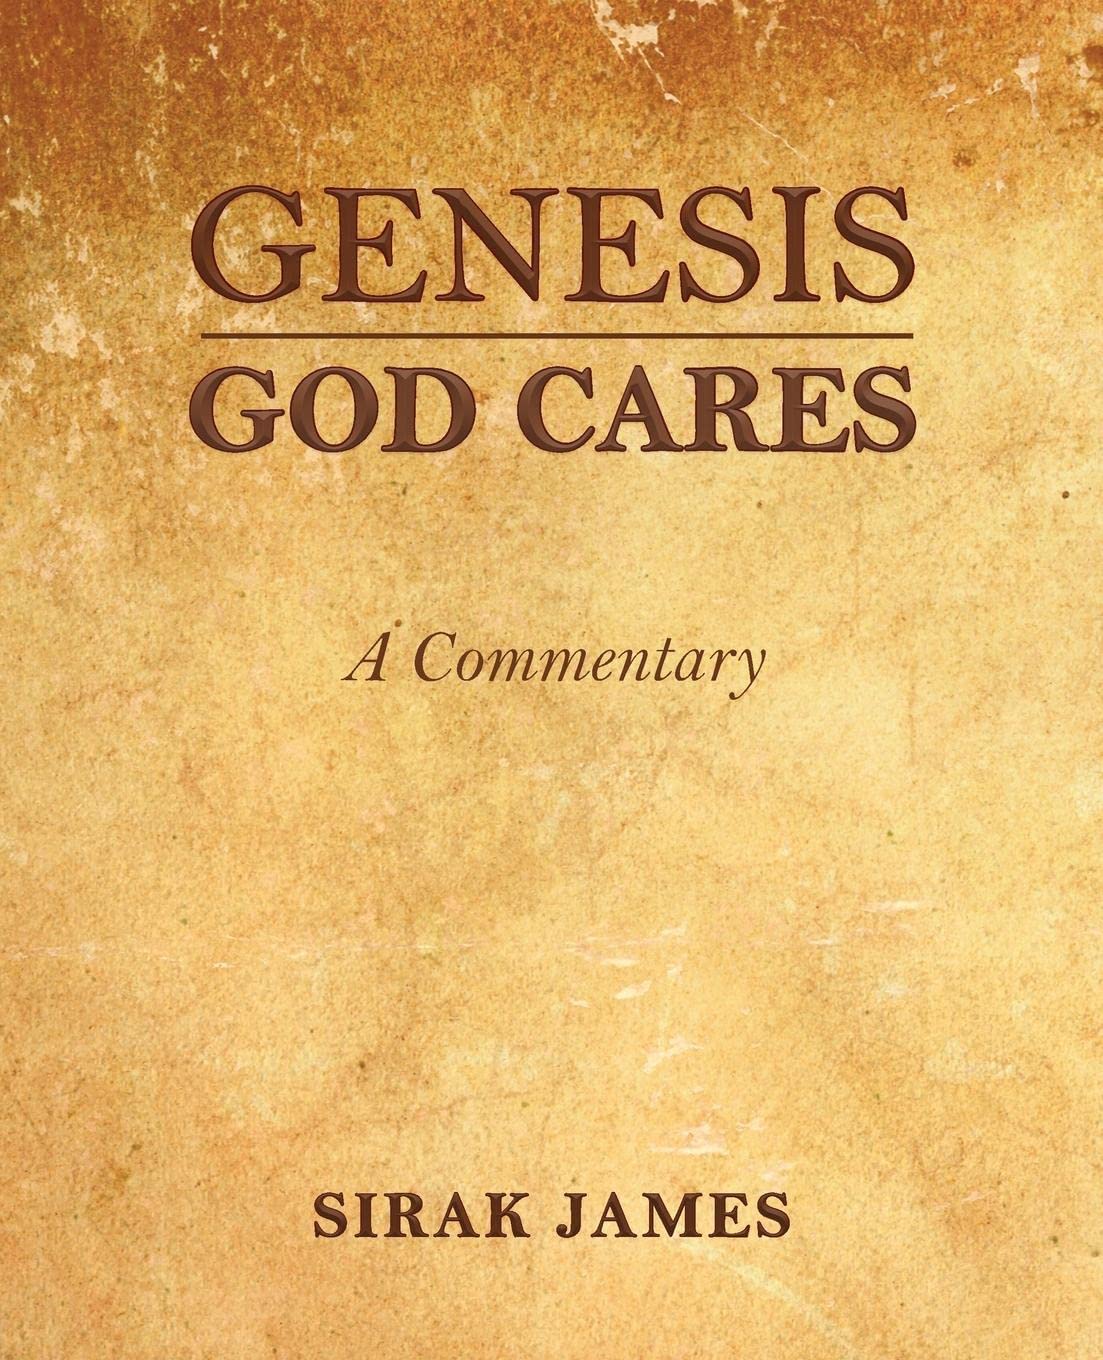 Author's Tranquility Press Announces the Publication of Sirak James’s Genesis God Cares, A Commentary